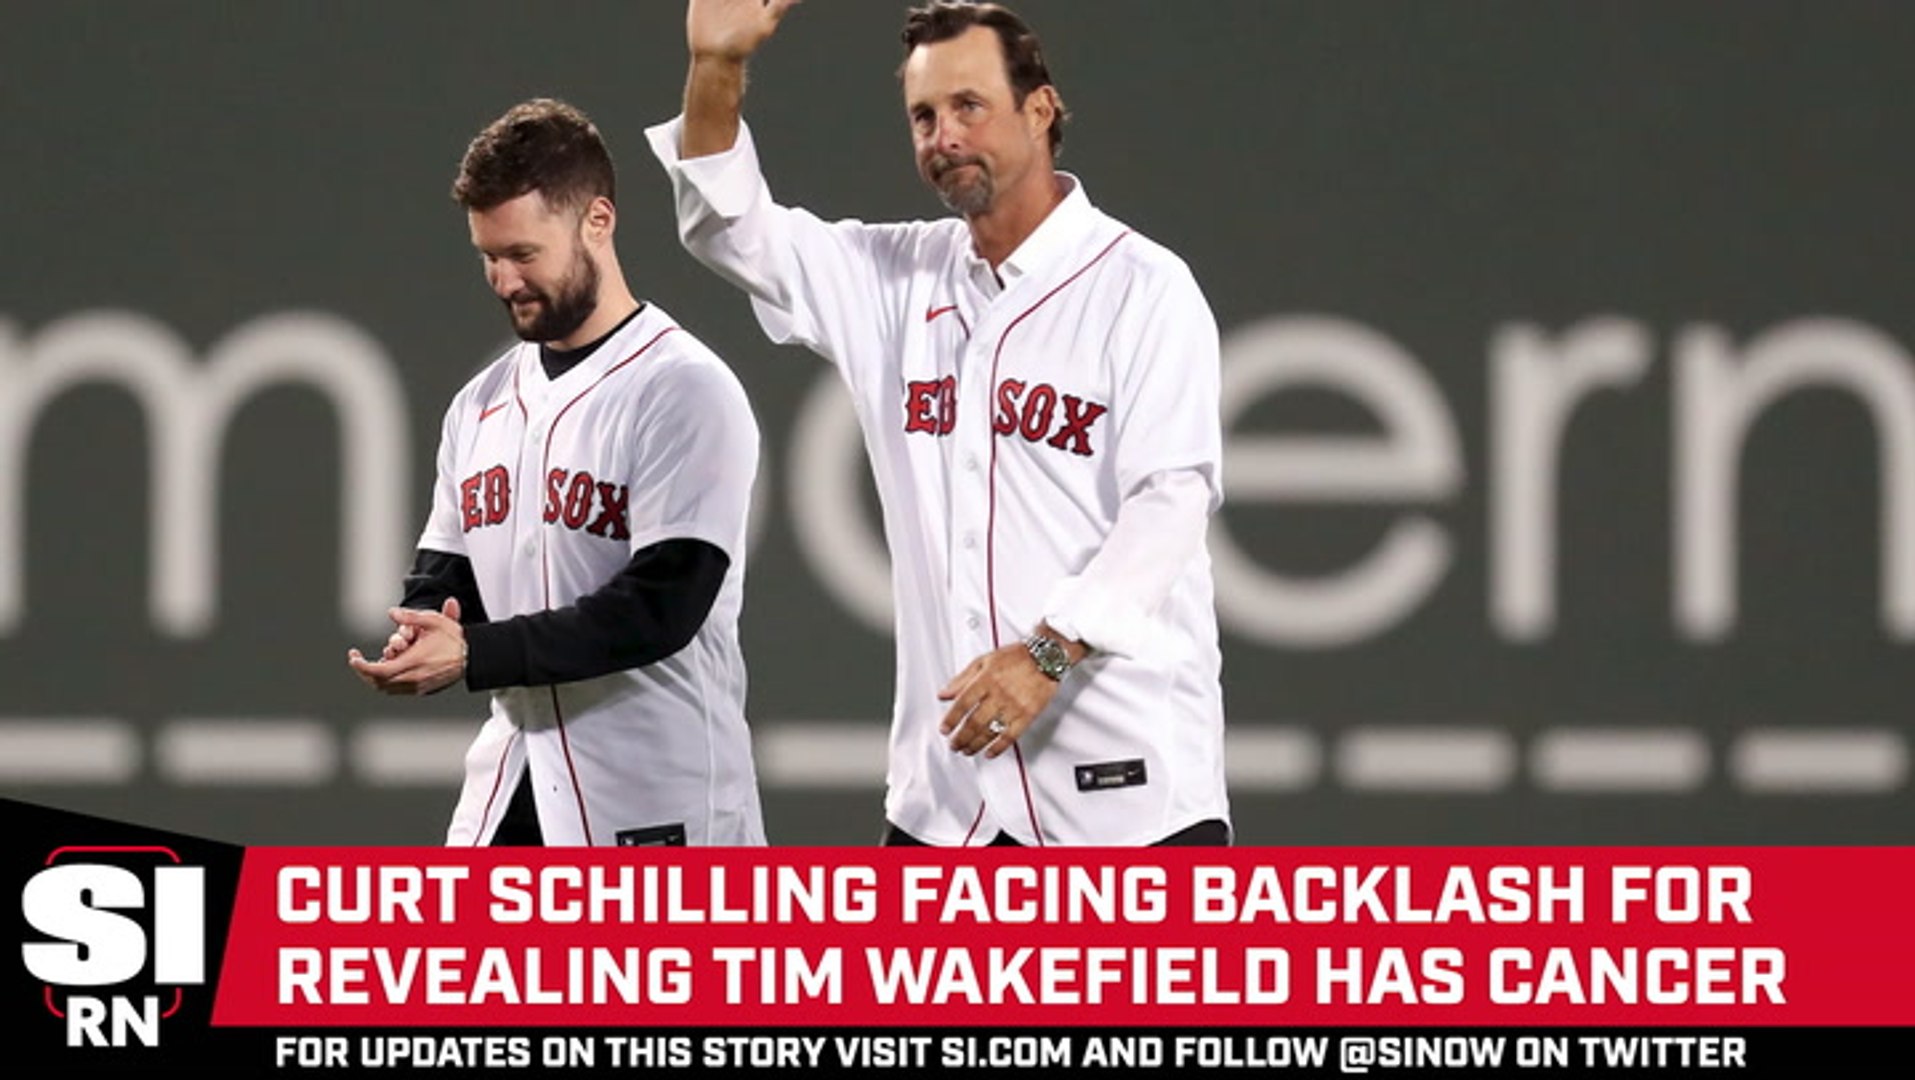 Curt Schilling Facing Backlash For Revealing Tim Wakefield Has